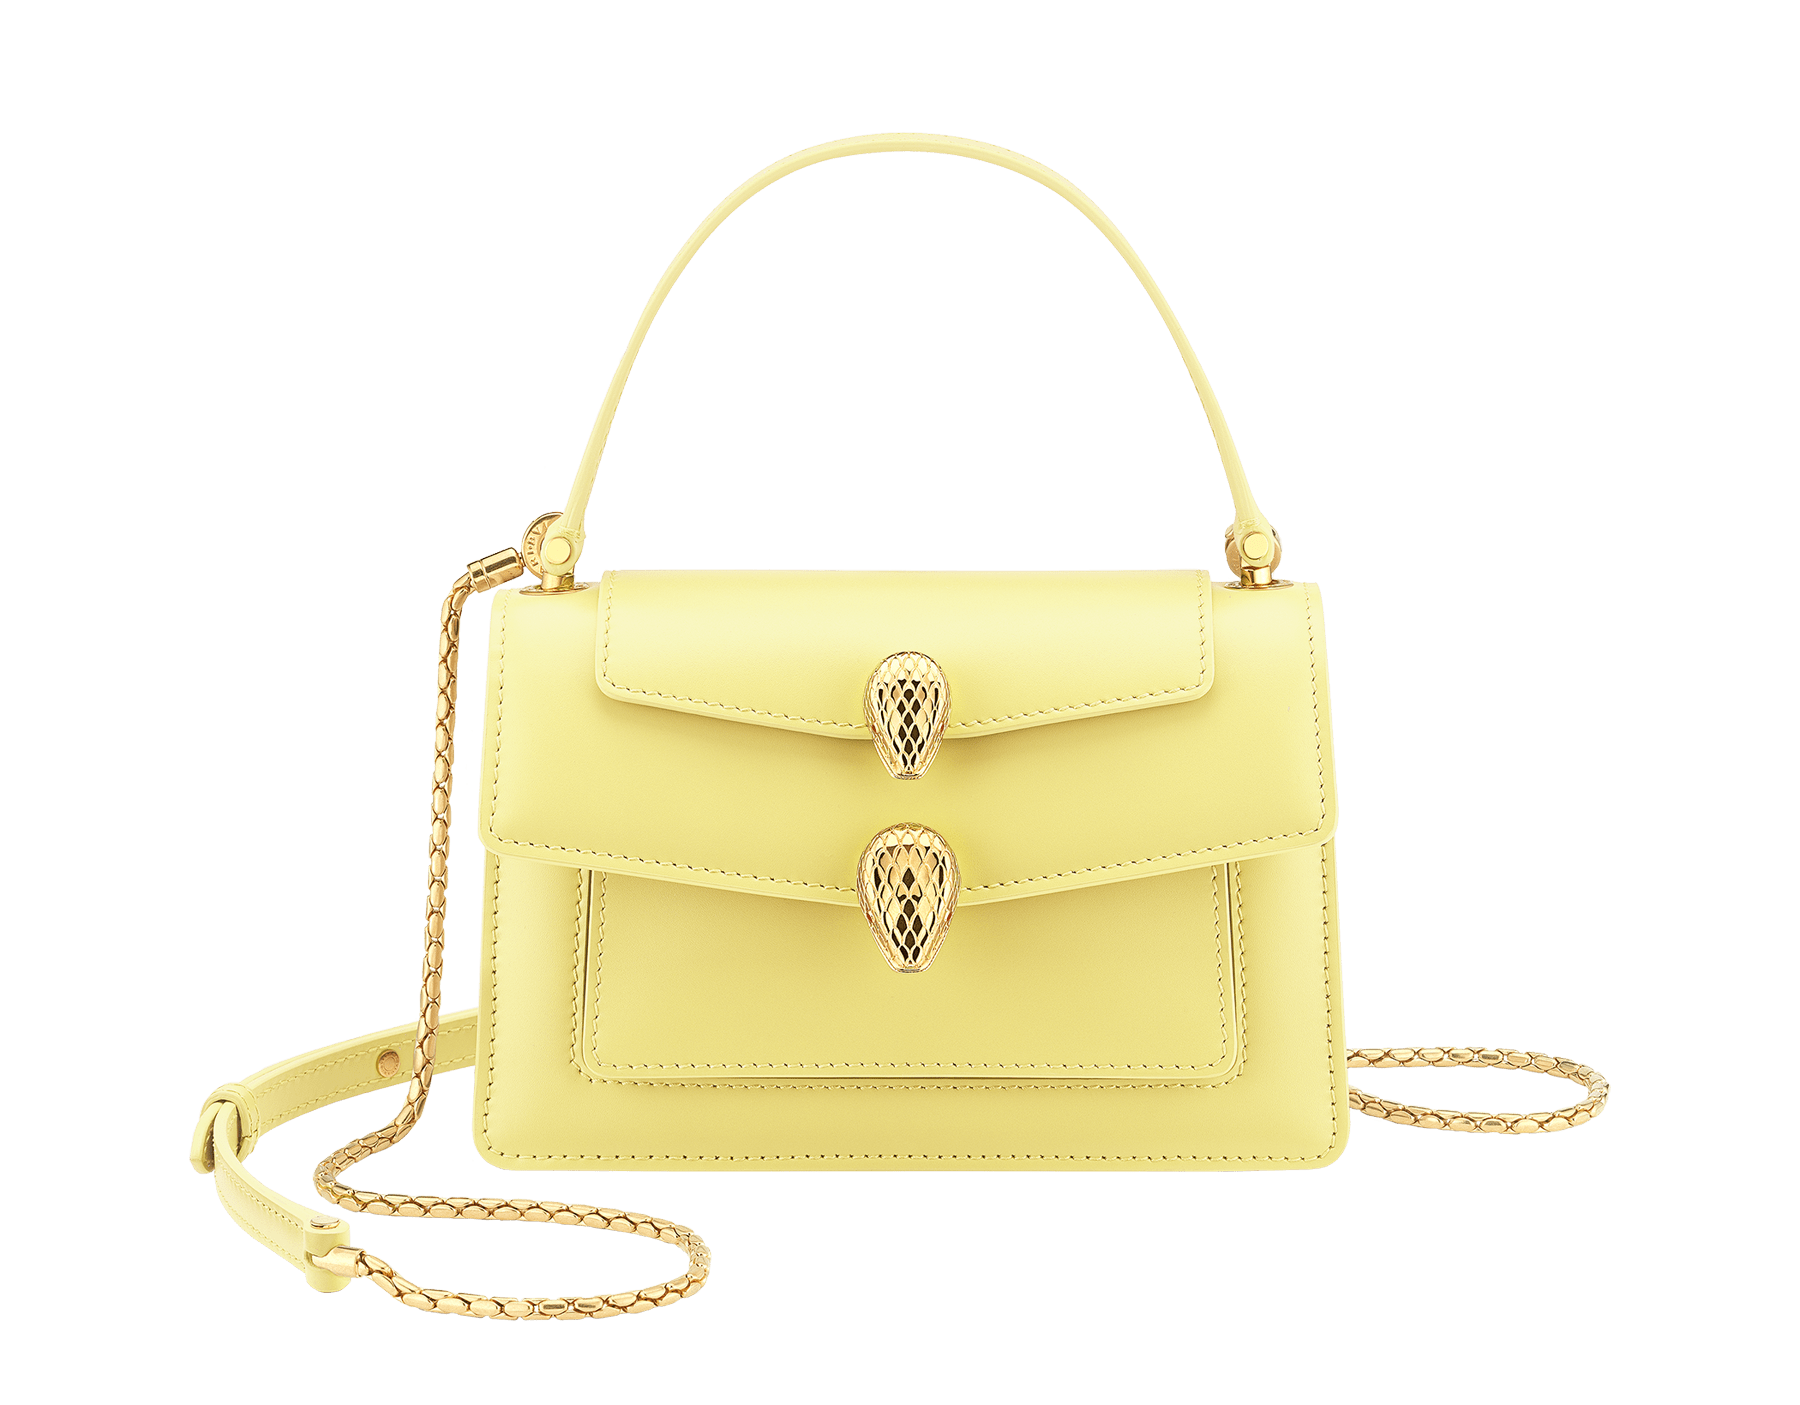 Alexander Wang x Bulgari small belt bag in sunbeam citrine calf leather with black nappa leather lining. Captivating double Serpenti head closure in antique gold-plated brass embellished with red enamel eyes. 291889 image 1